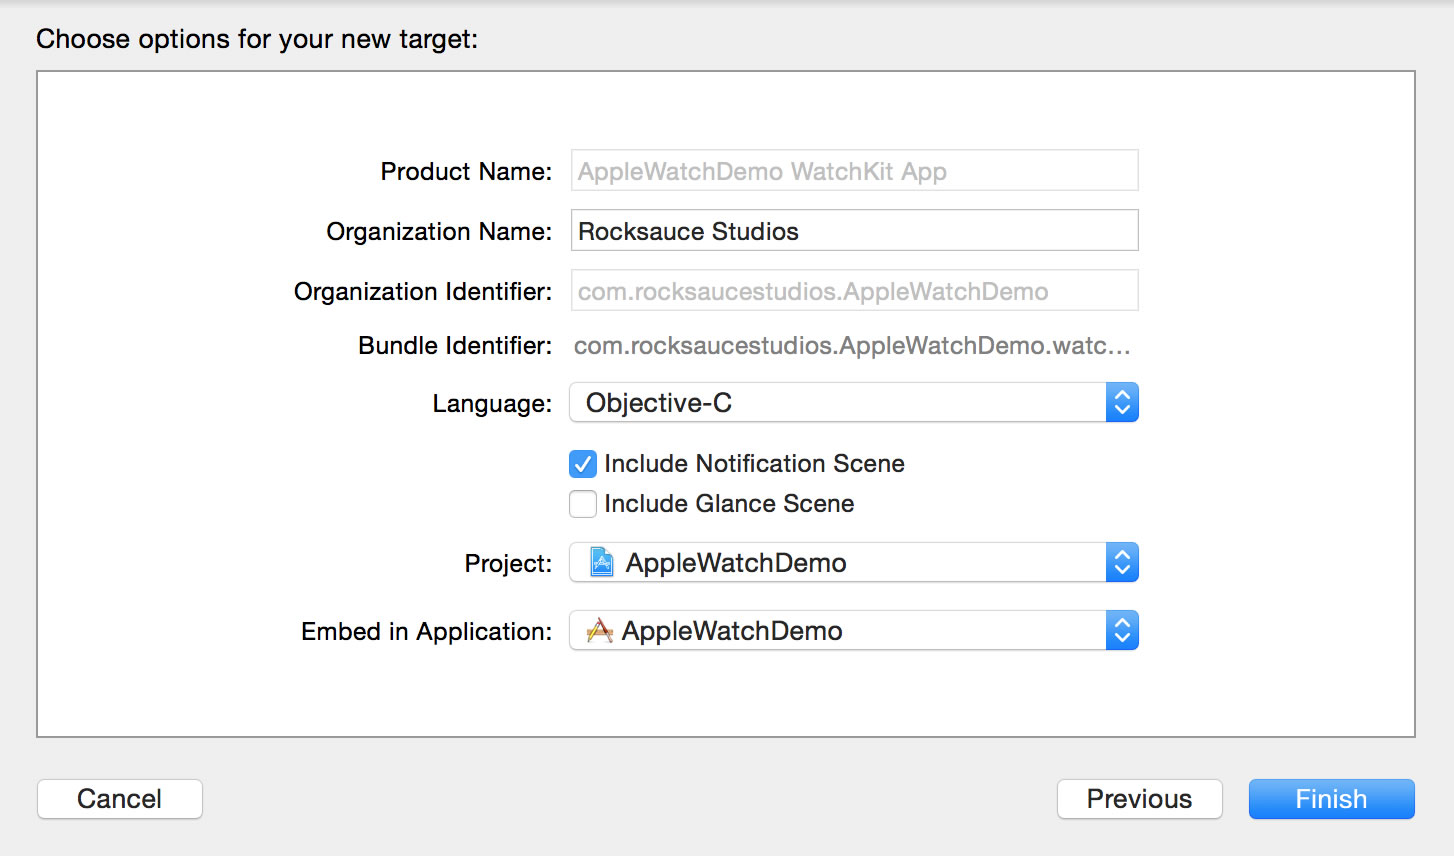 Figure 6      : The extended options selection when adding the WatchKit target to your application